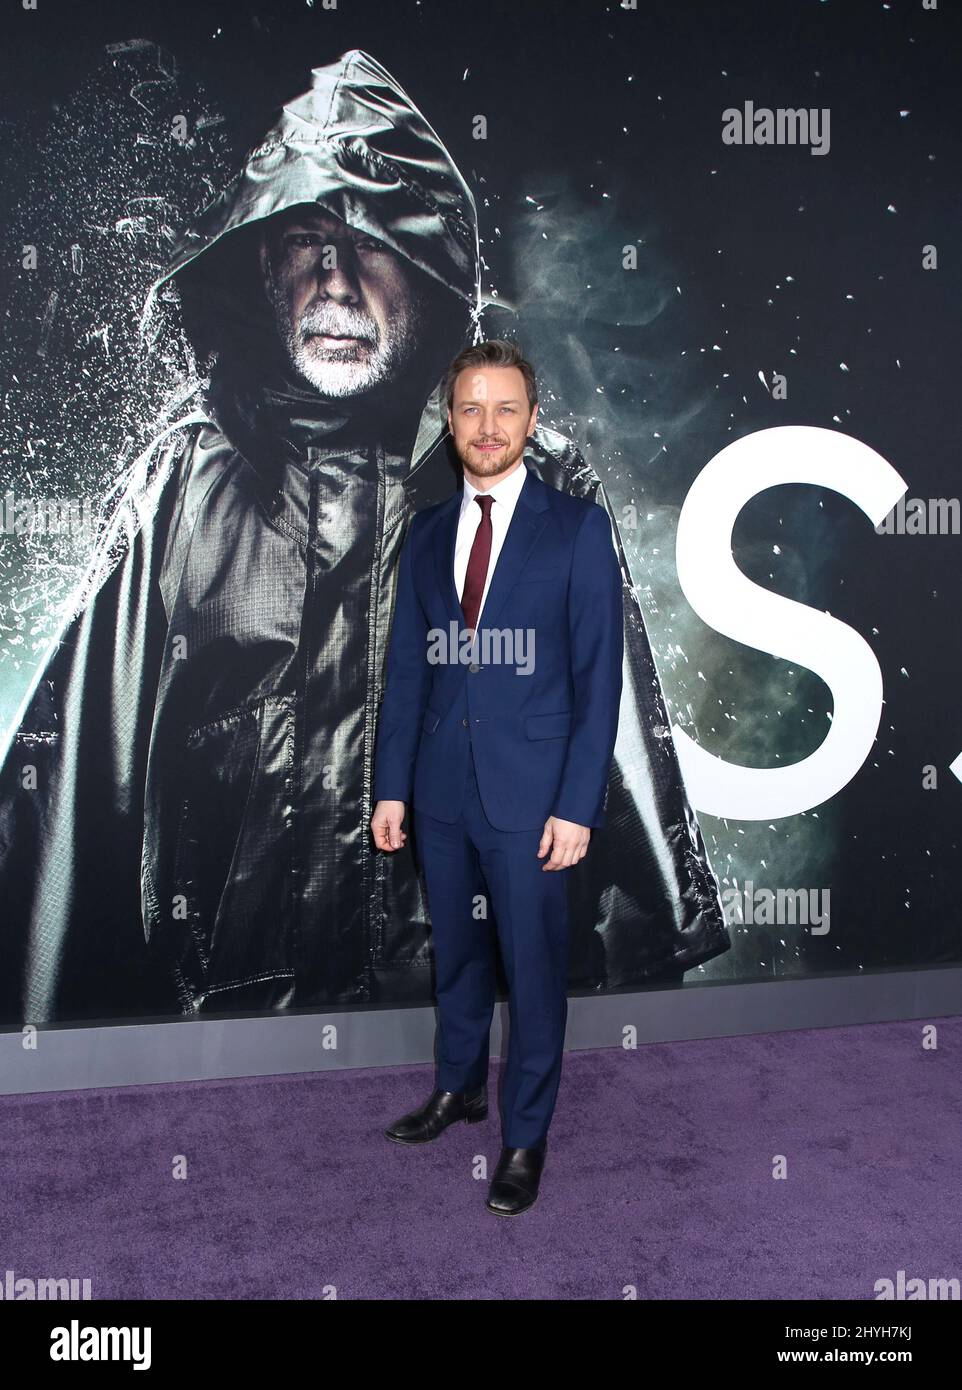 James McAvoy attending the 'Glass' New York Premiere held at the SVA Theater on January 15, 2019 in New York City, NY Stock Photo